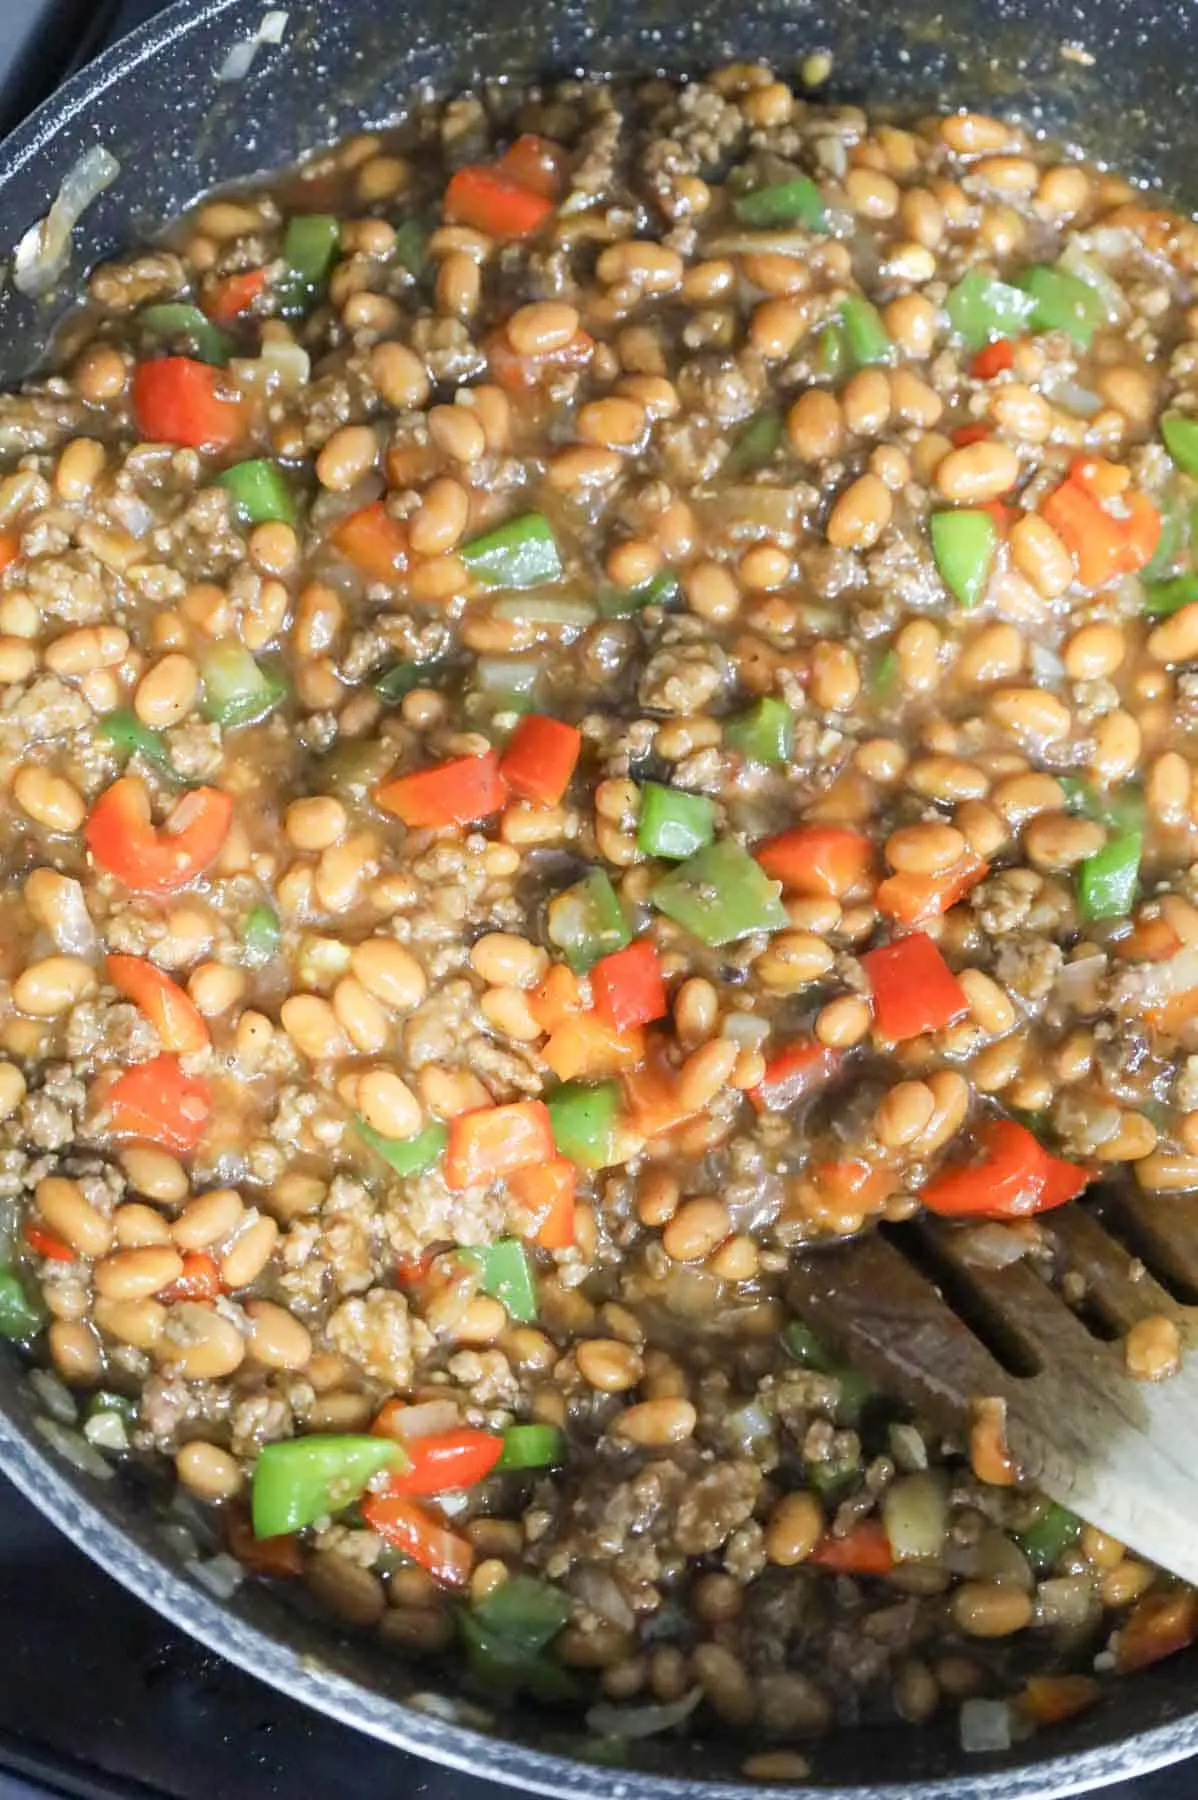 ground beef, bell pepper, beans and barbecue sauce mixture in a skillet